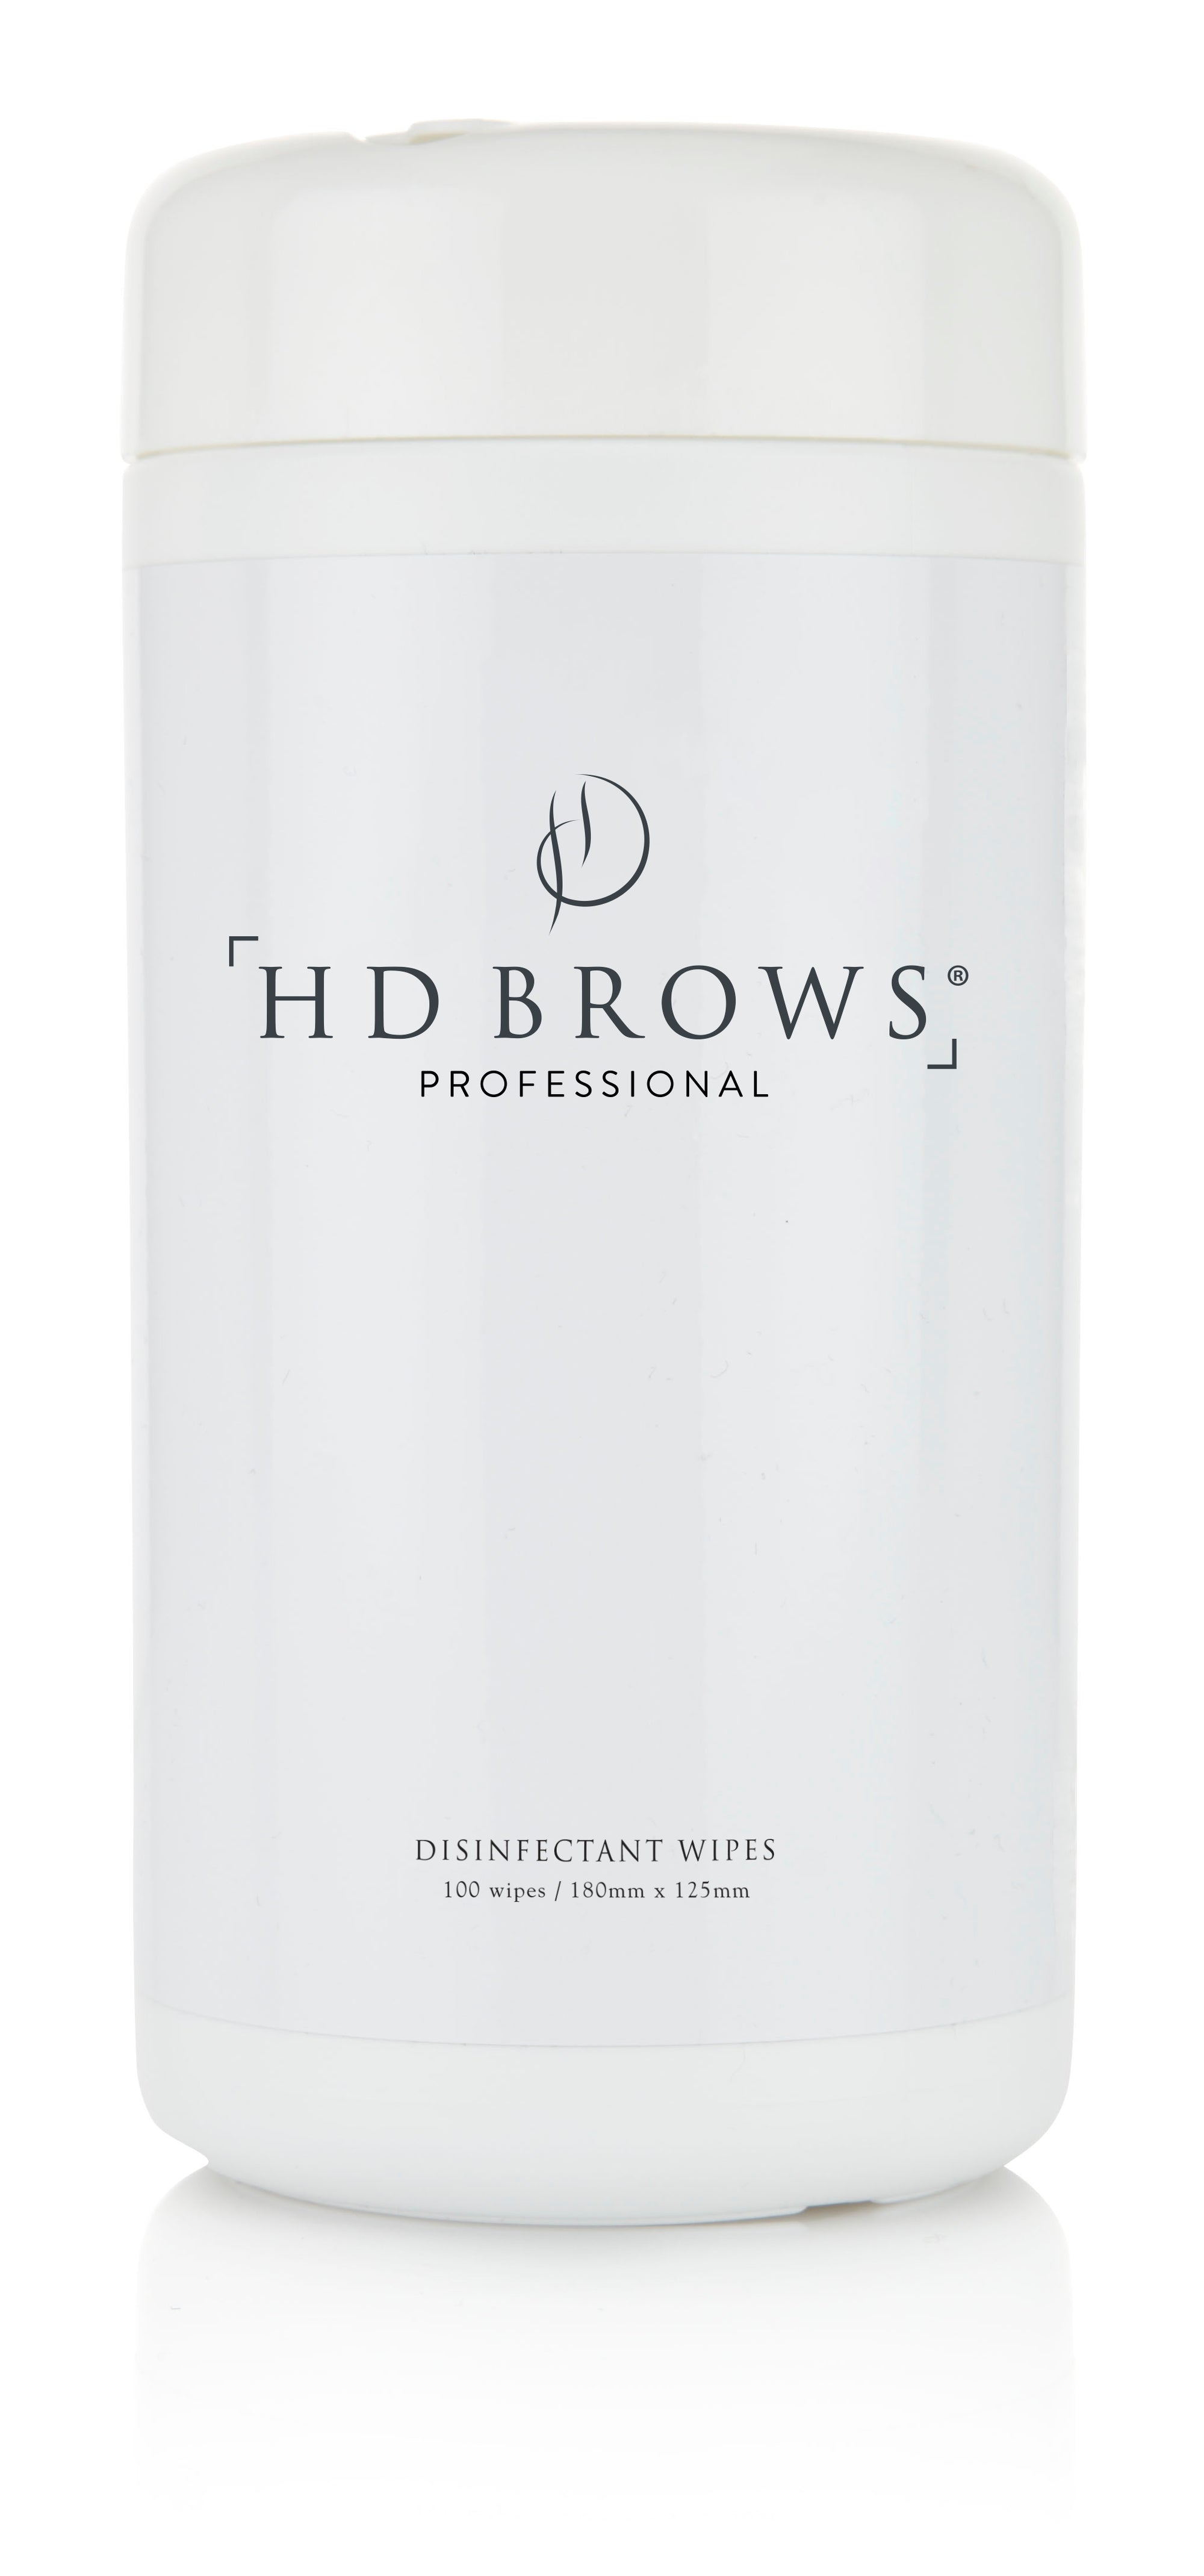 HD Brows Disinfectant Wipes